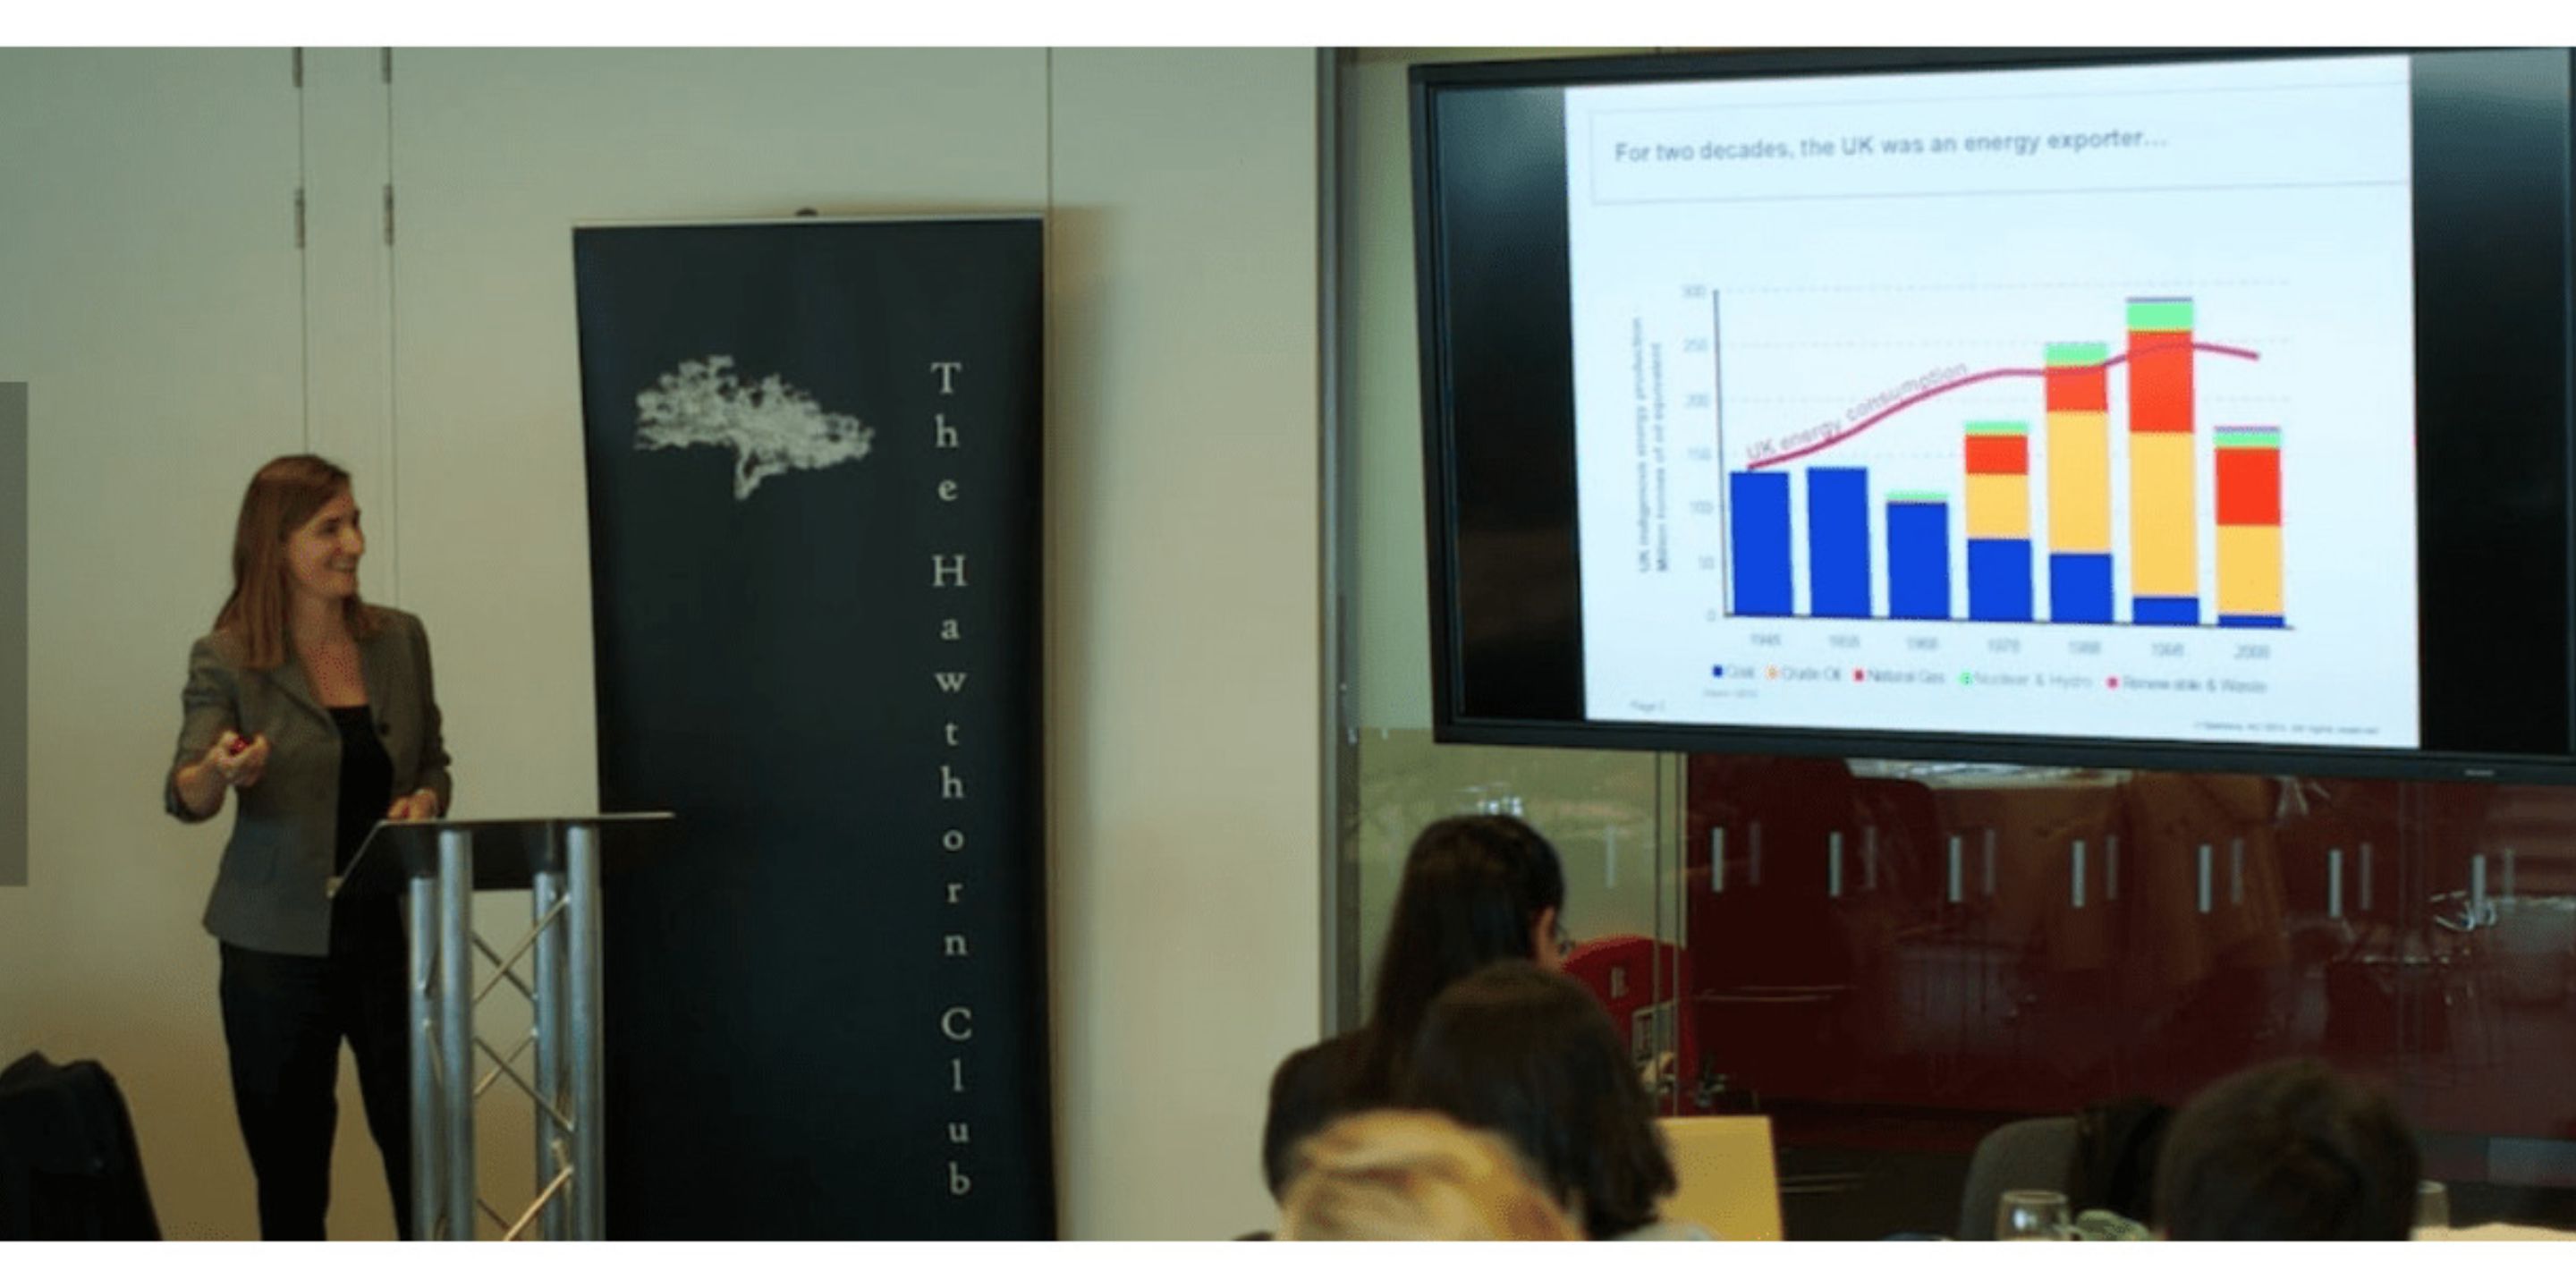 Tania speaking at the Hawthorn Club in 2013 on Low Carbon Tech where she presented on Offshore Wind growth in the UK